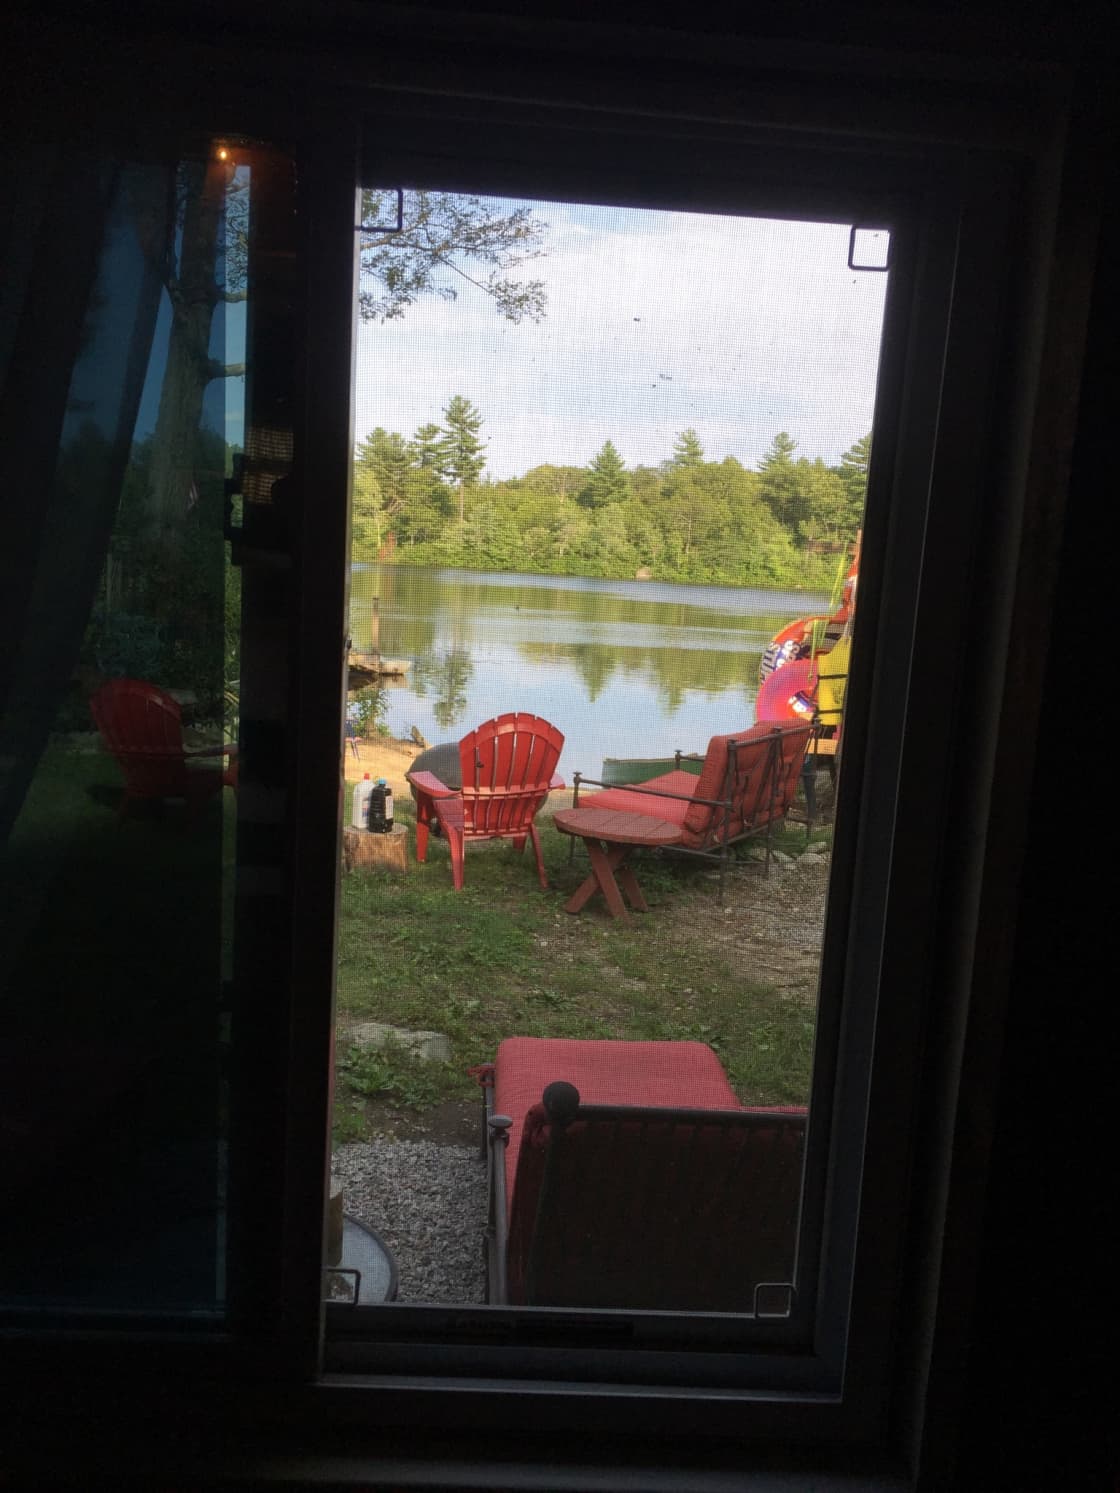 view from inside camp out to water and fire pit in back yard